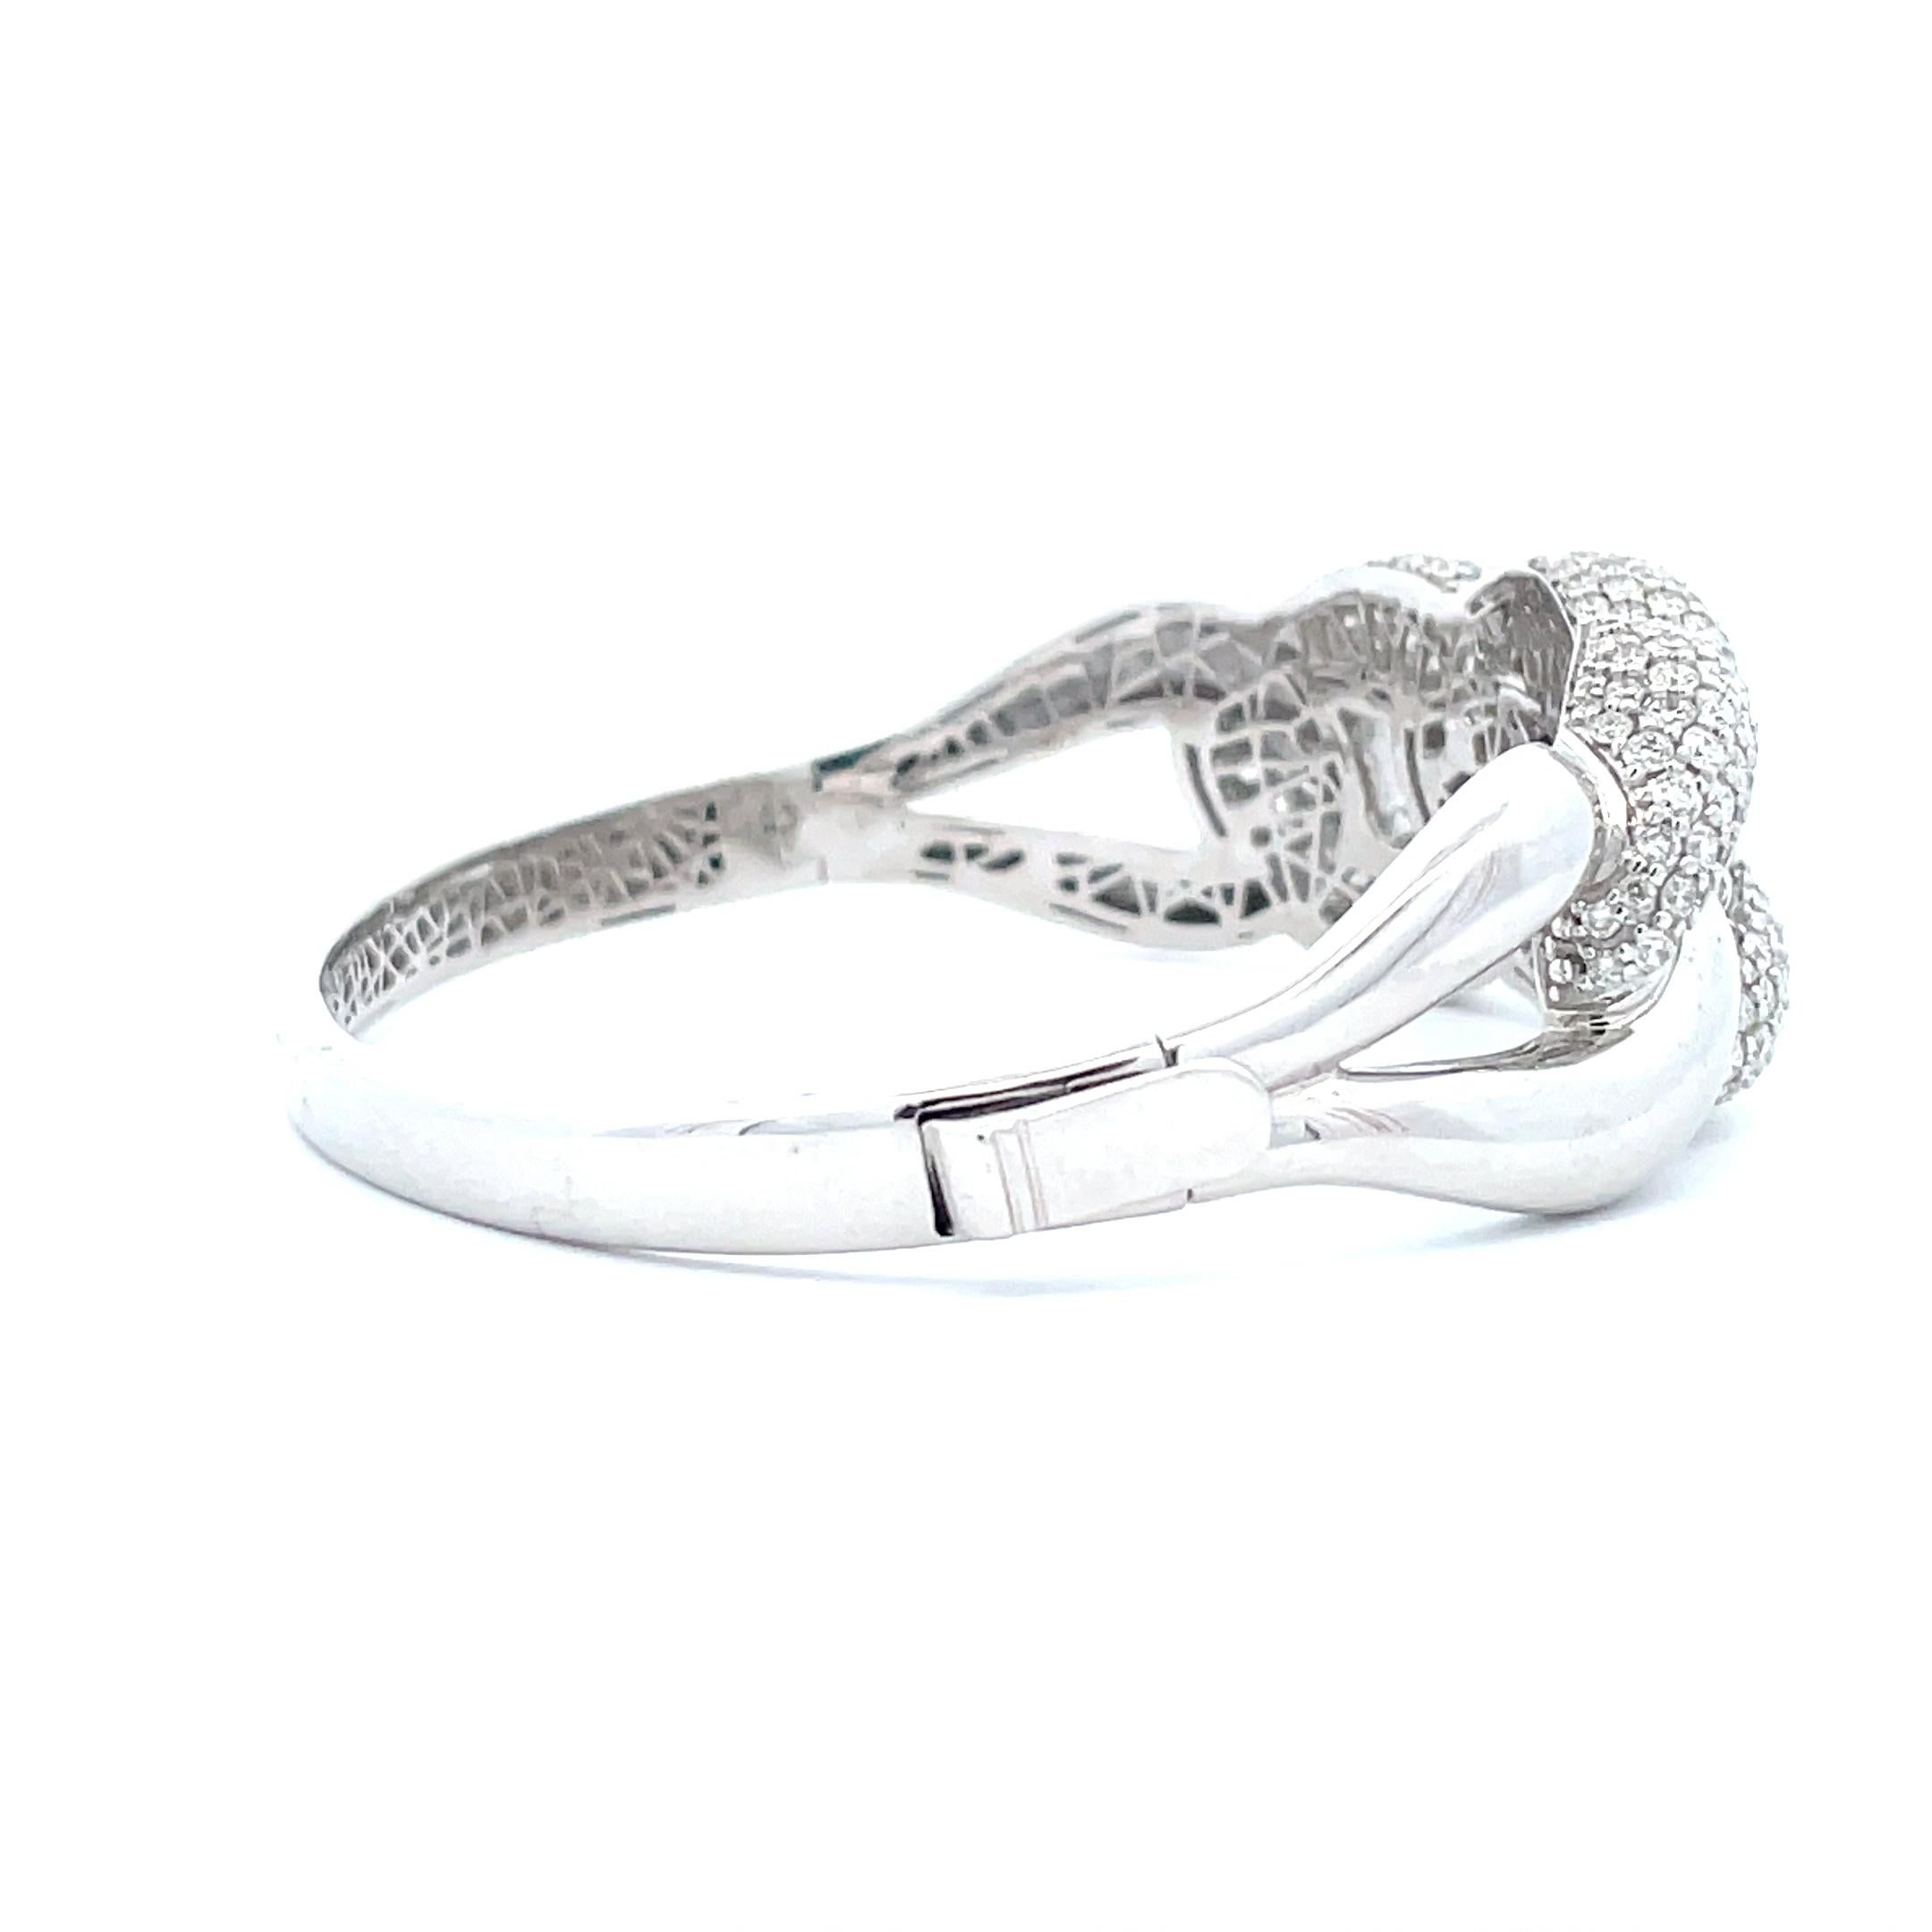 This 6.01 ct. Diamond Cluster Knot Link Bangle exemplifies the rare beauty of the diamond and showcases it to its best advantage. This beautiful piece is highly polished to enhance the reflective quality of its pave diamonds and is crafted by a